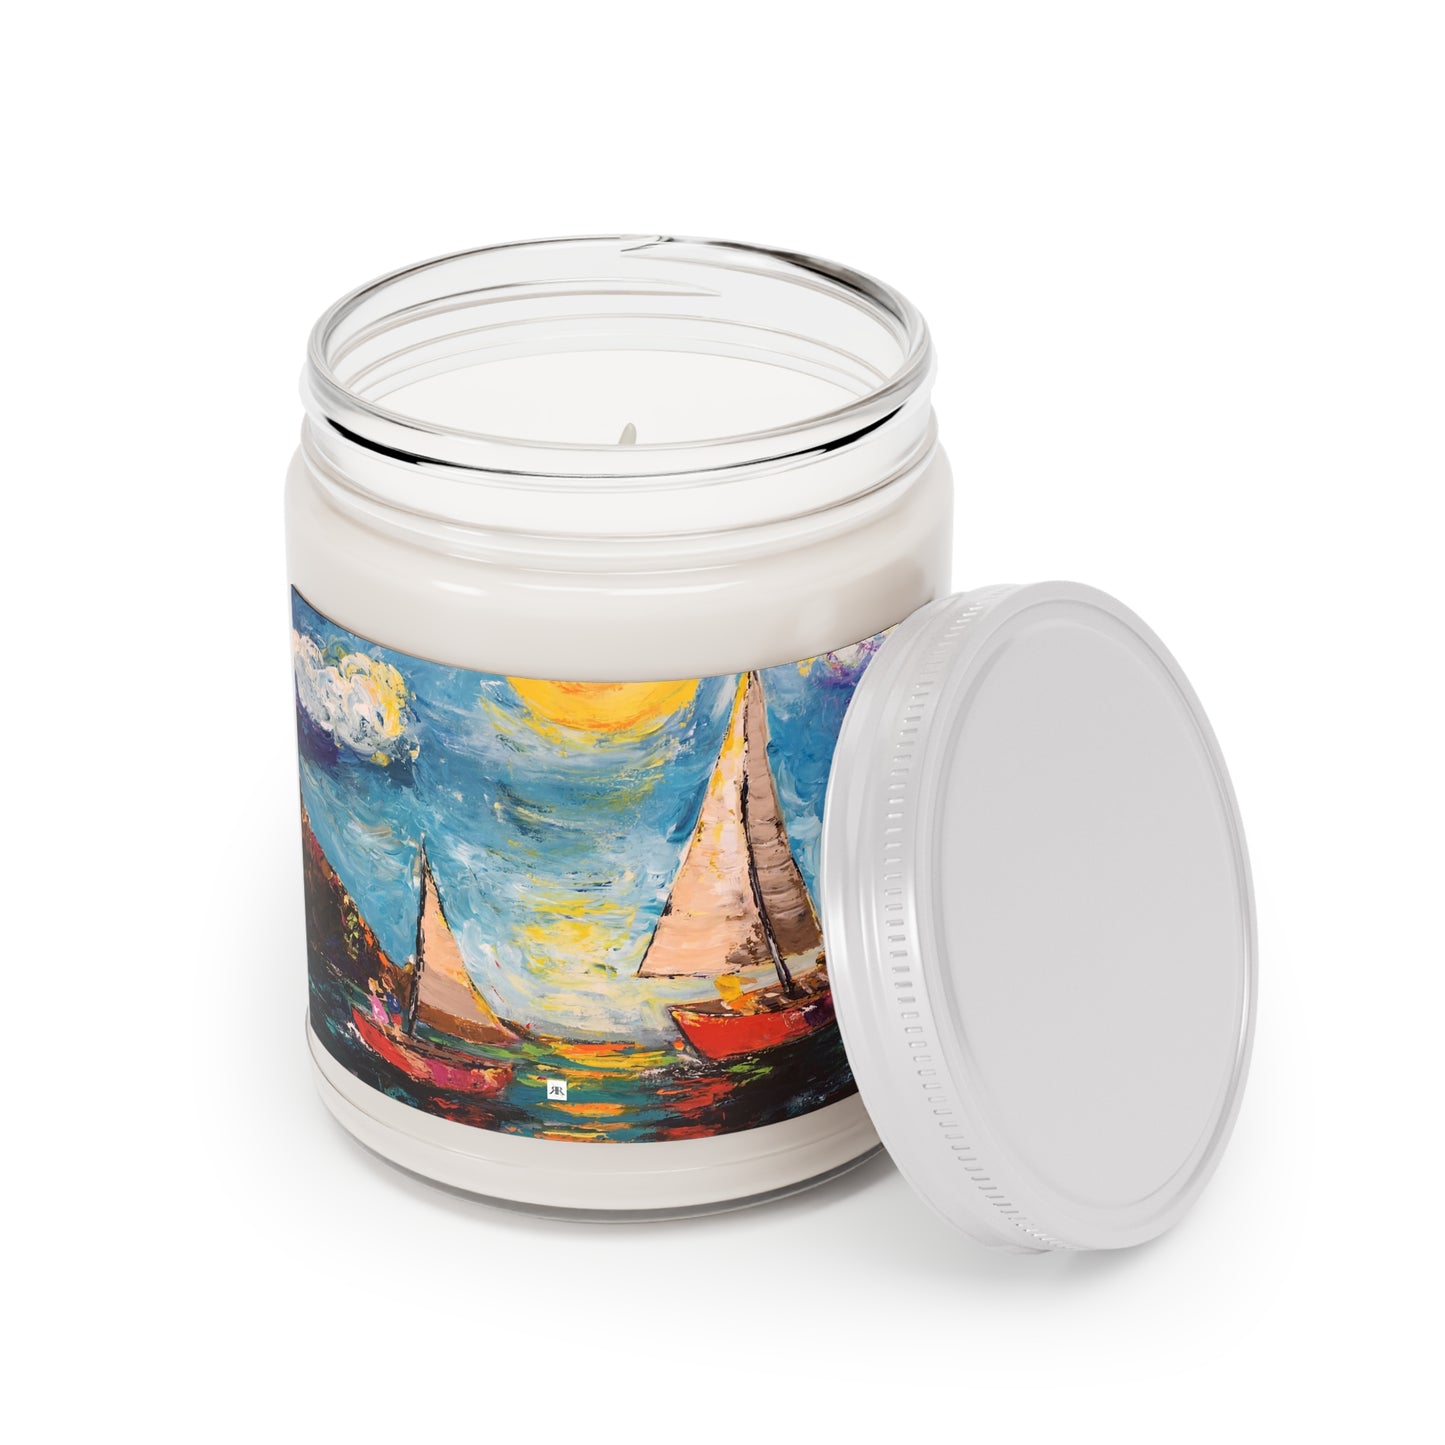 Sunny Sails Scented Candle 9oz